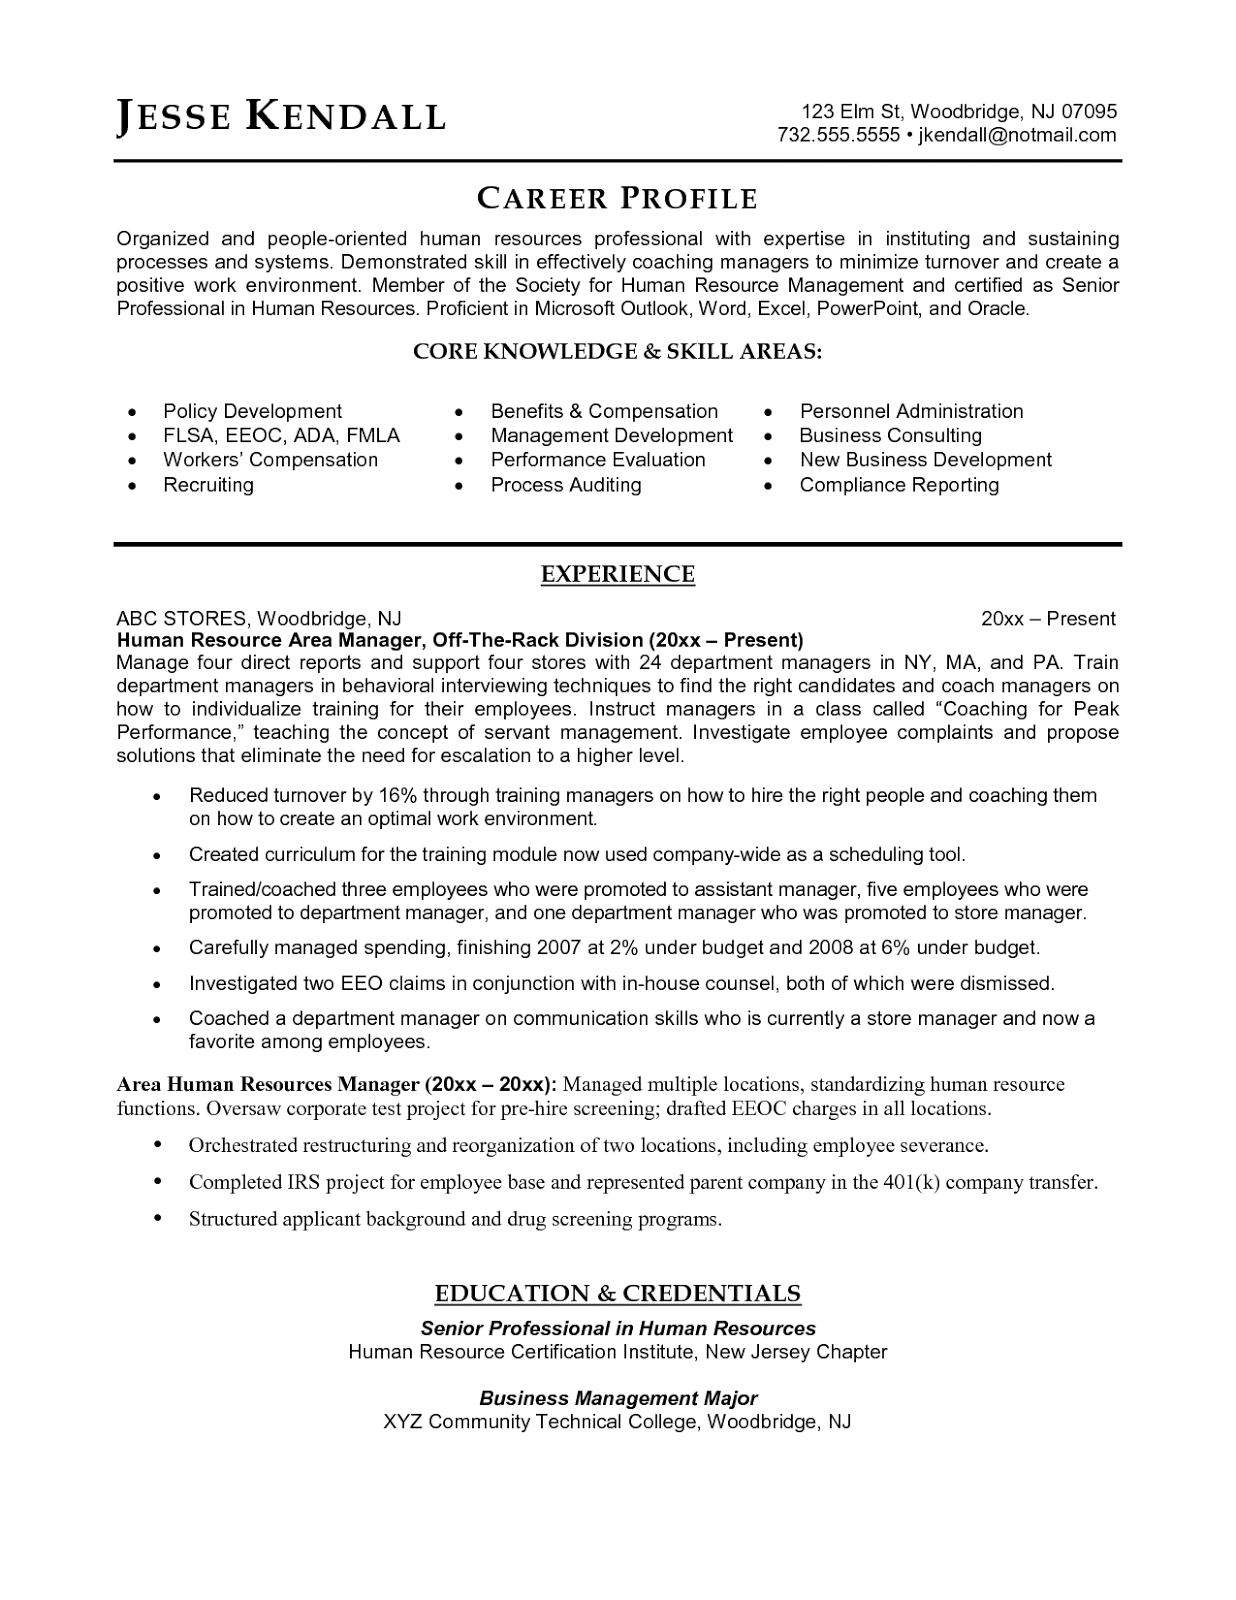 Hr resume format for experienced